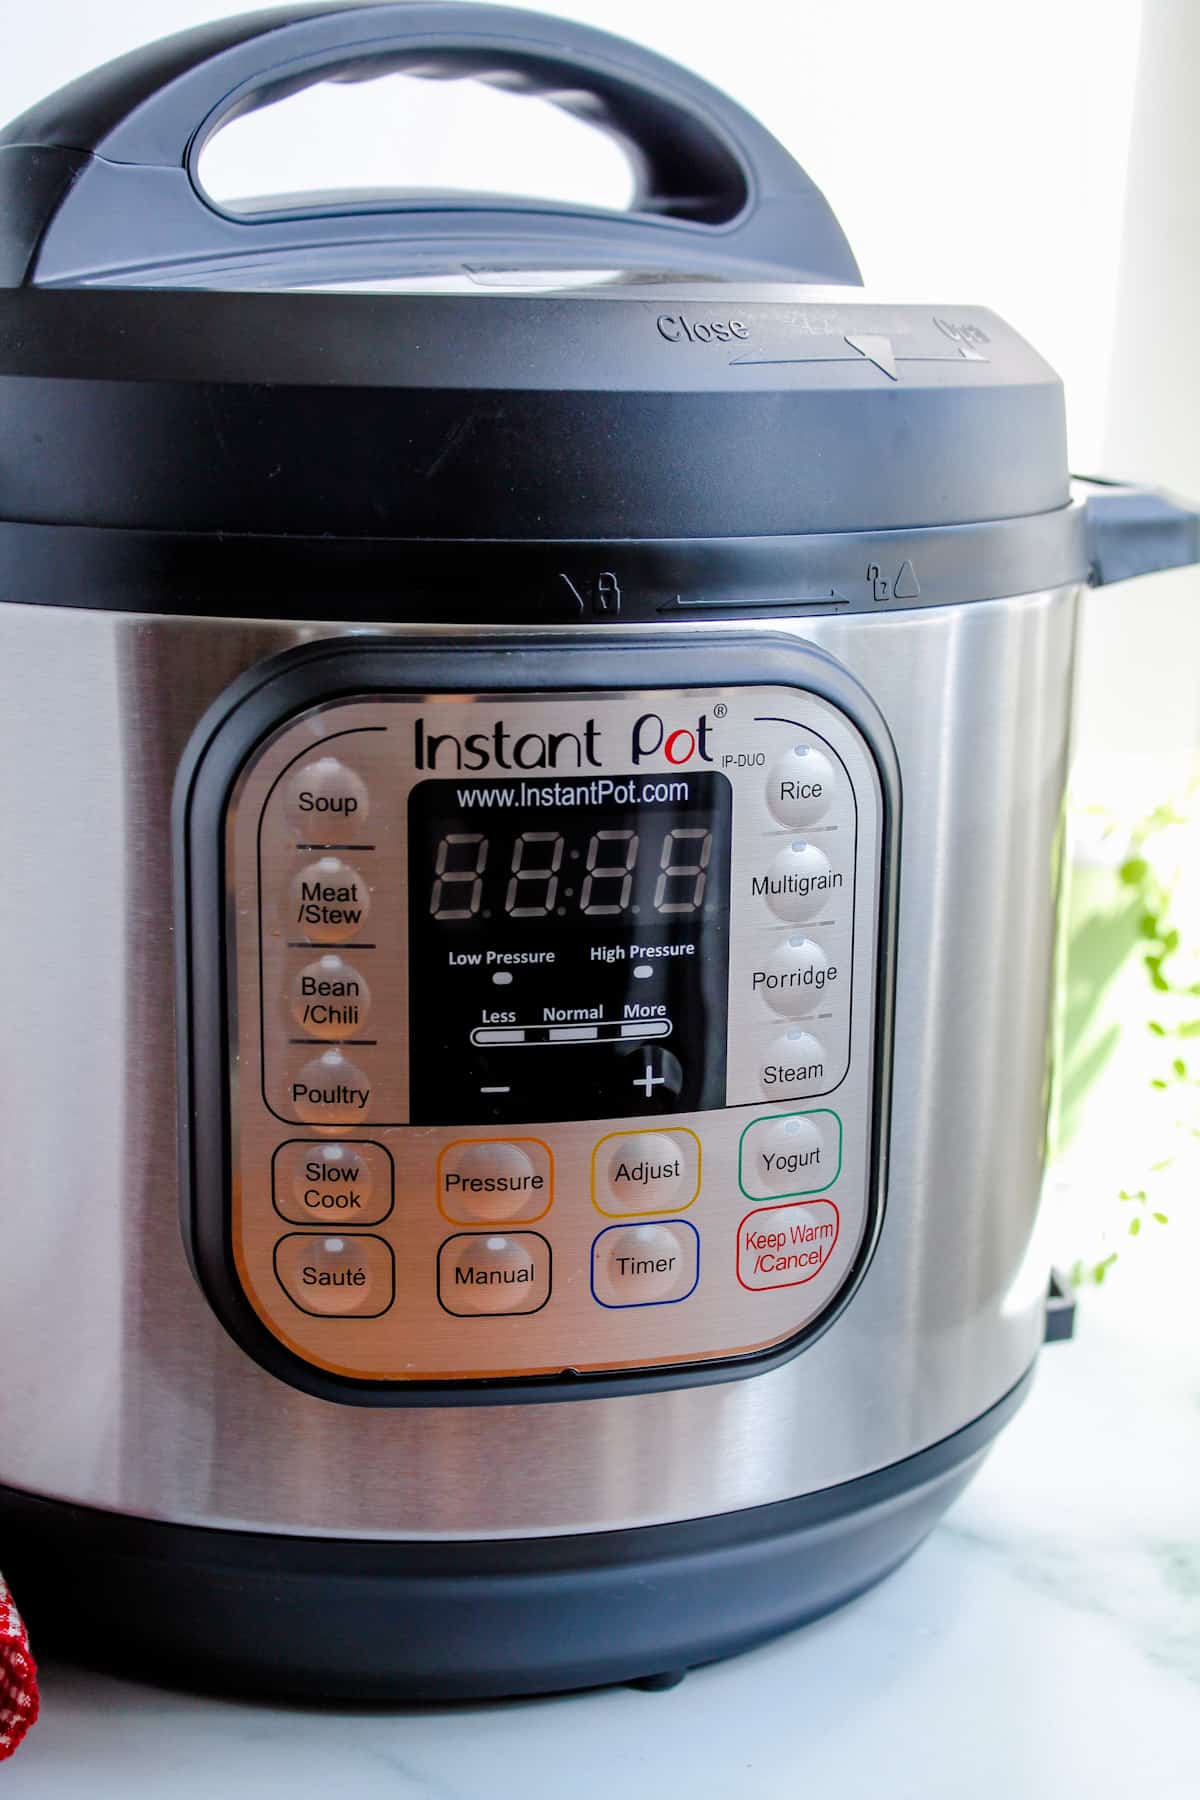 Side angle image of an Instant Pot.